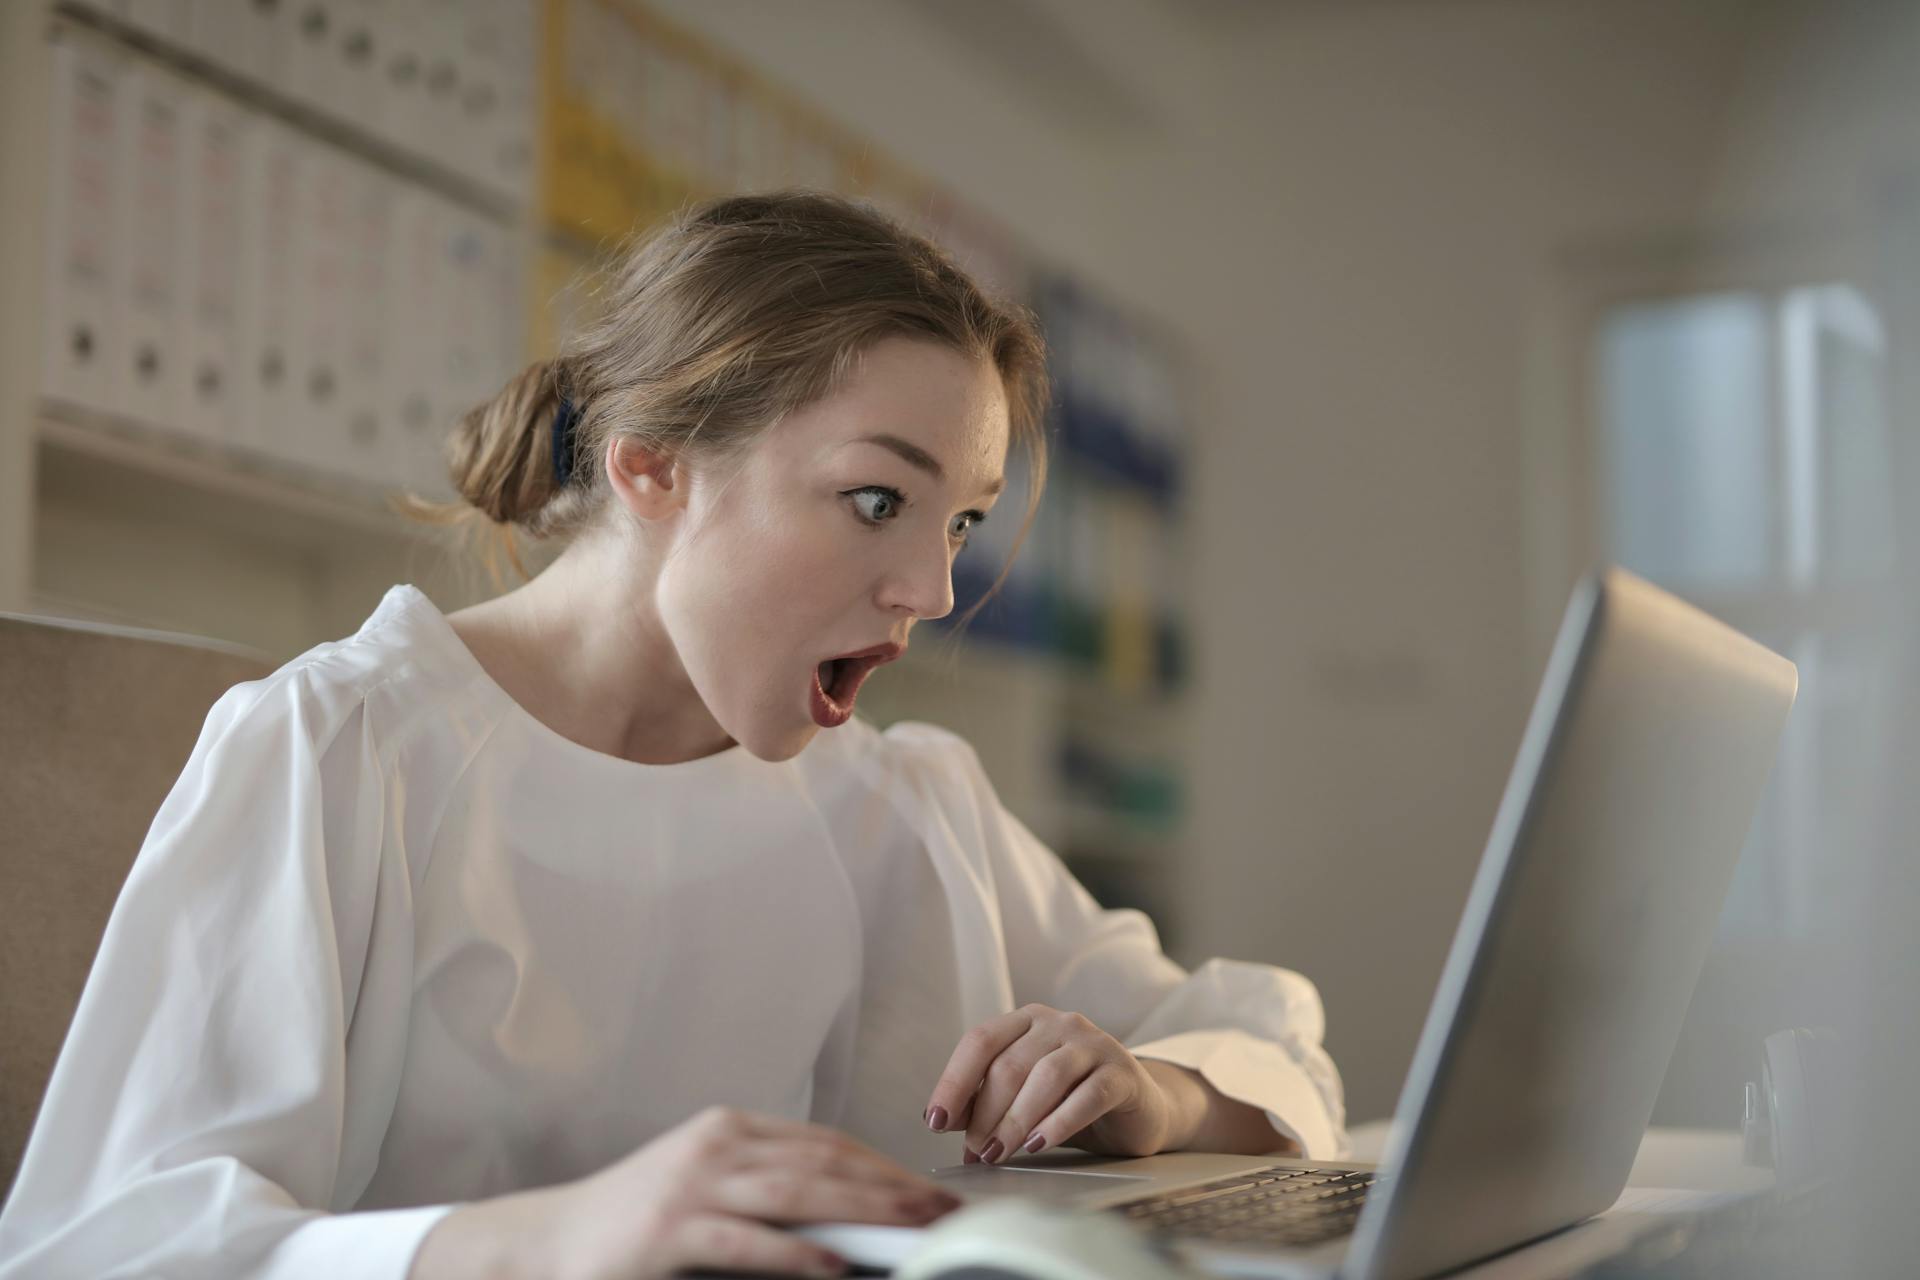 A shocked woman looking at her laptop screen | Source: Pexels